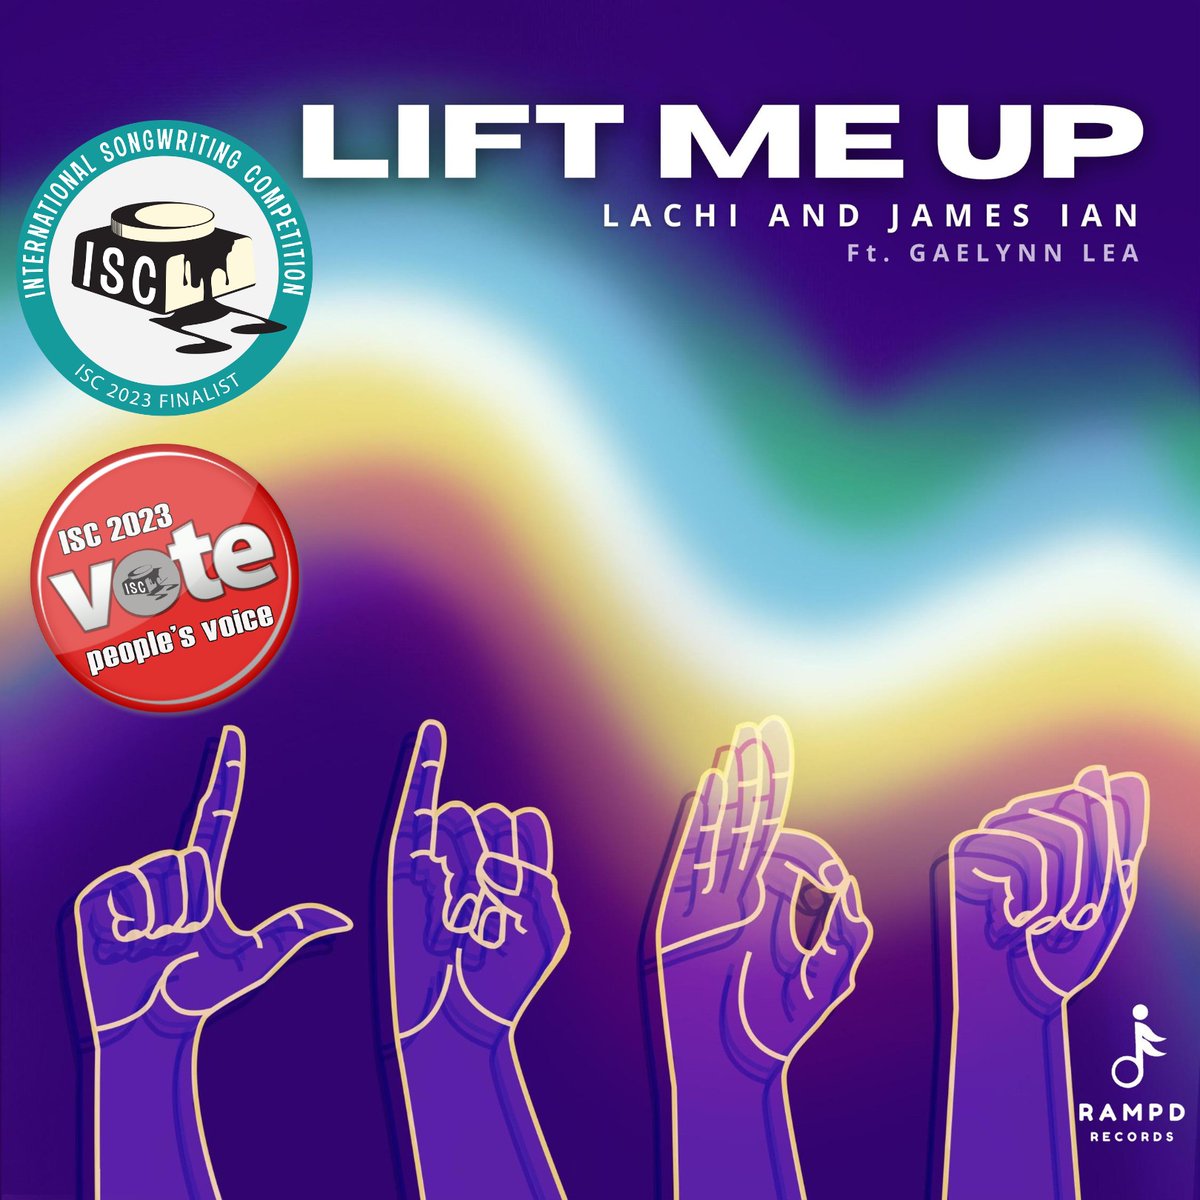 The song “Lift Me Up,” a collaboration between @rampdup members @lachimusic, James Ian, and Yours Truly, is a finalist for the 2023 International Songwriting Competition (@intlsongcomp)! It is also up for People's Voice, an online voting contest that allows the public to vote…